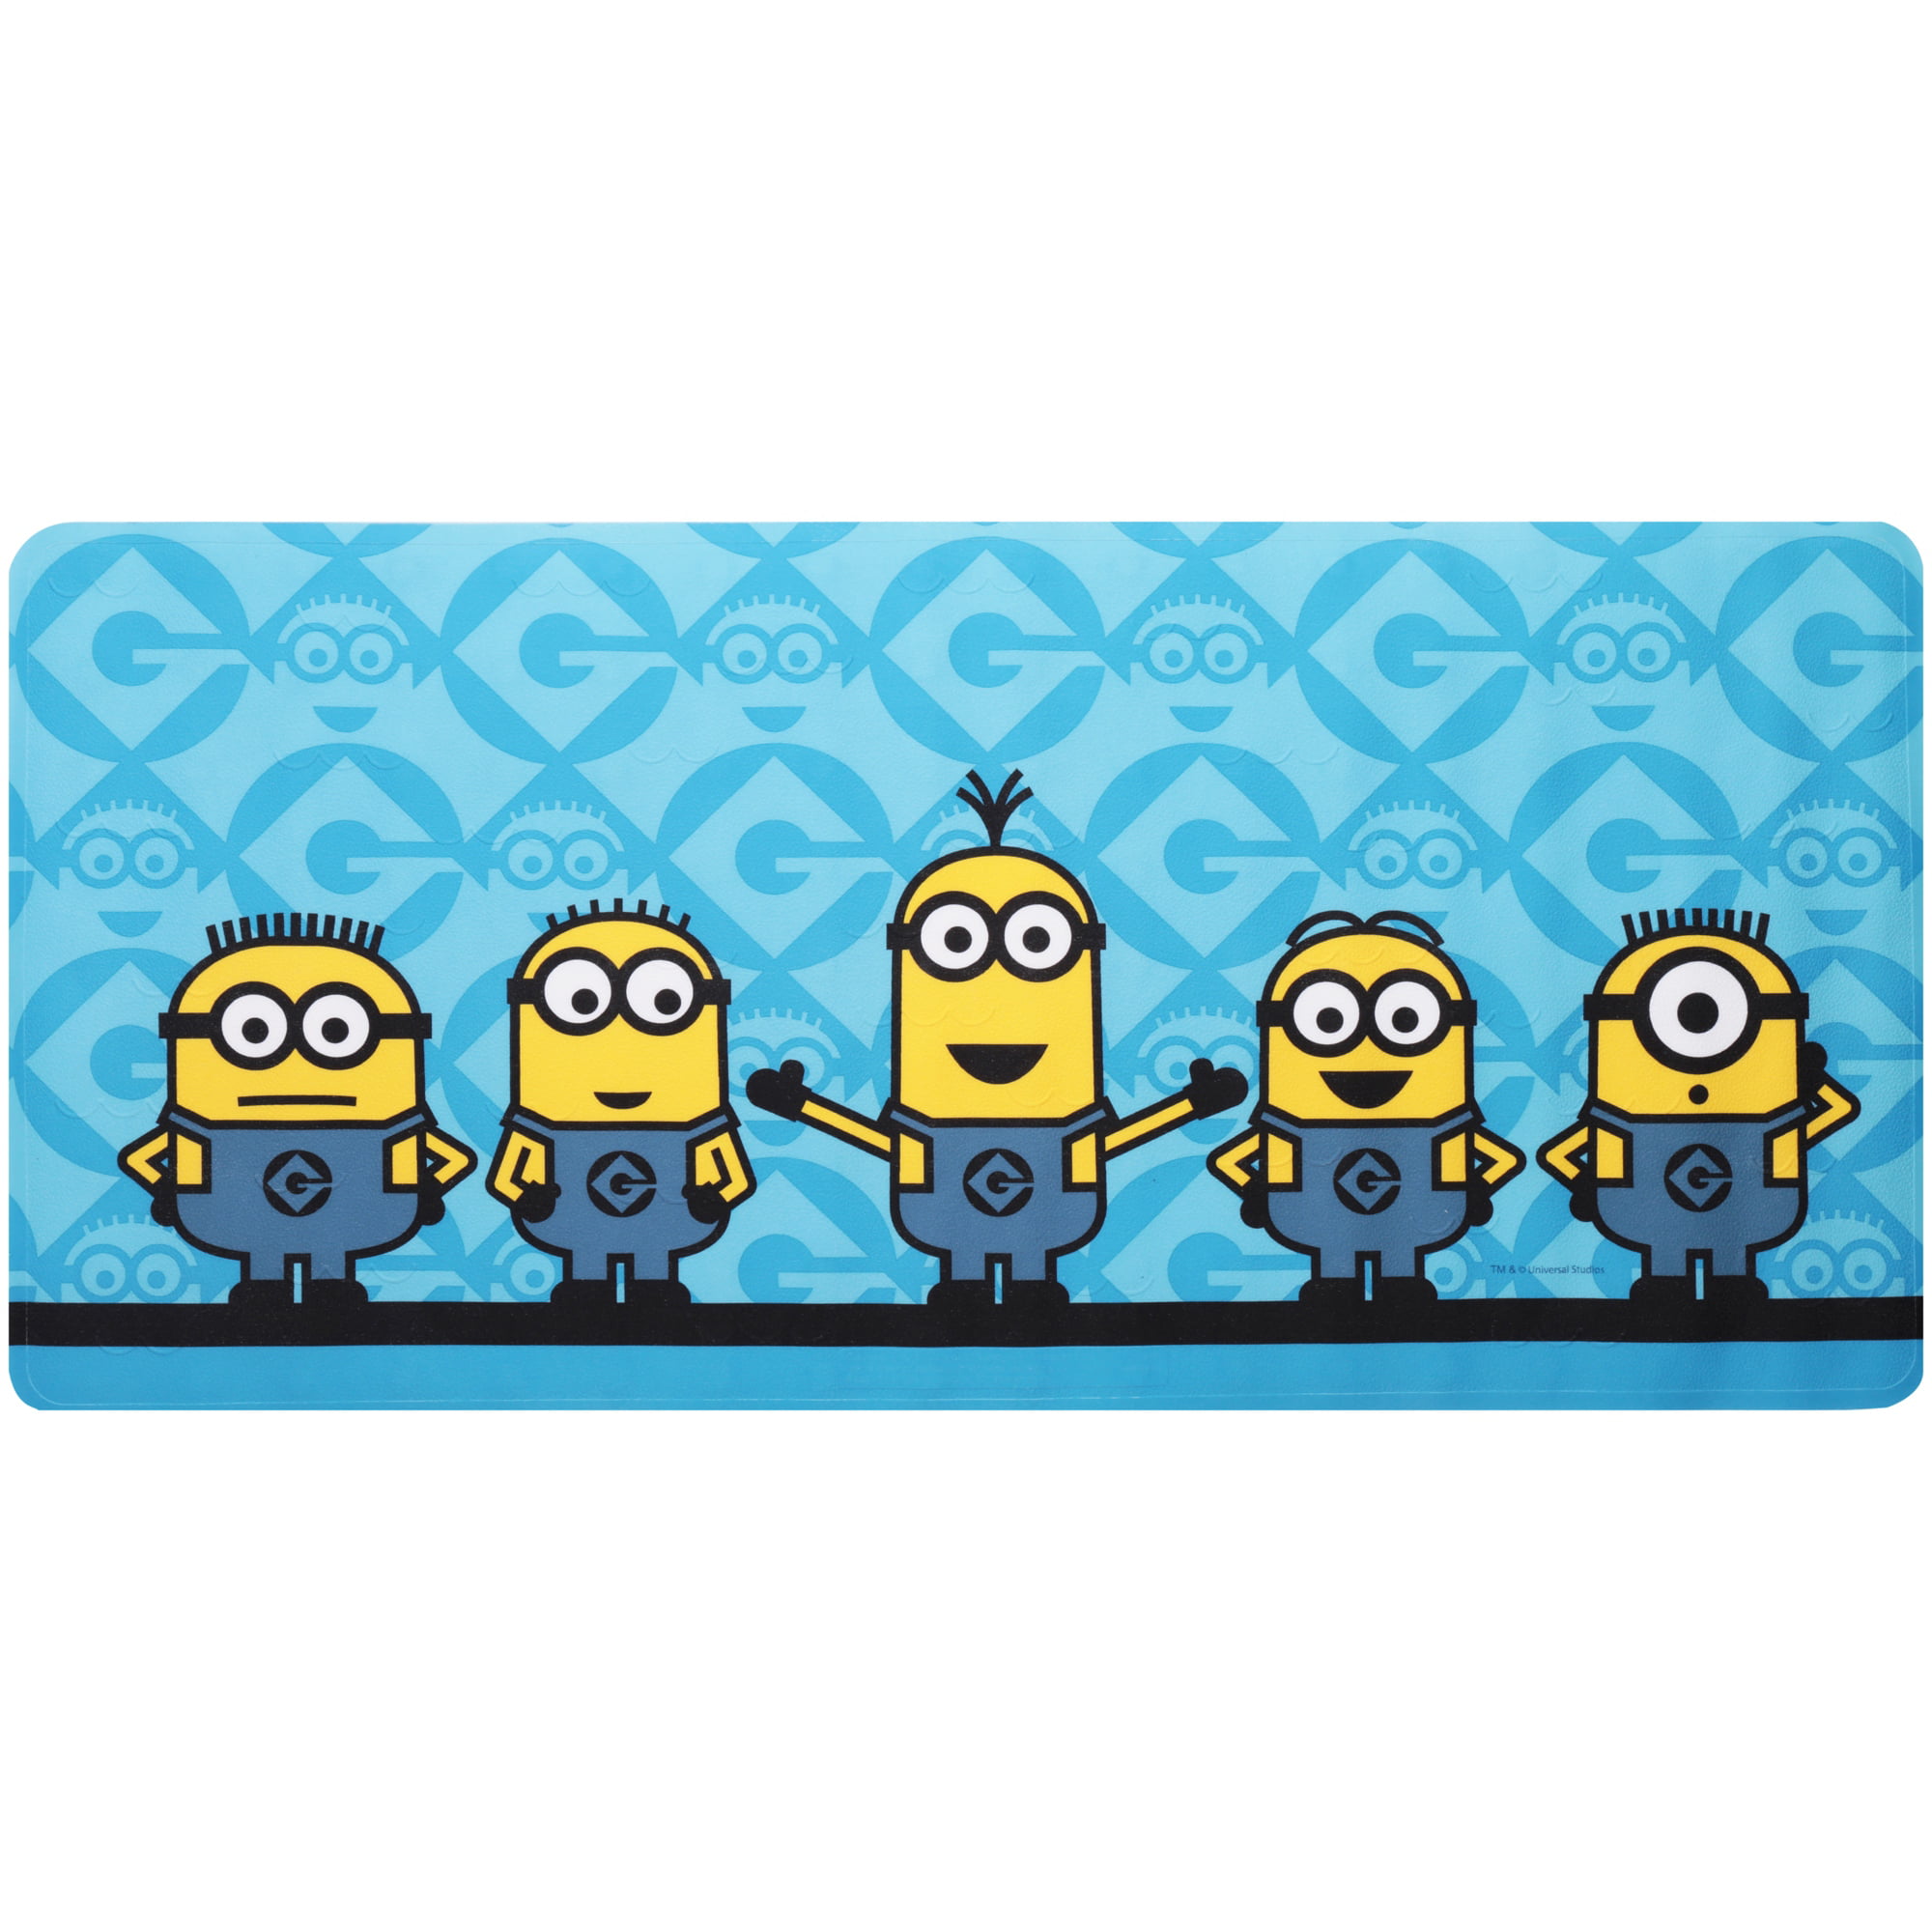 Despicable Me Minions Bathroom Accessories Shower Curtain Towels Rugs Mat Basket 